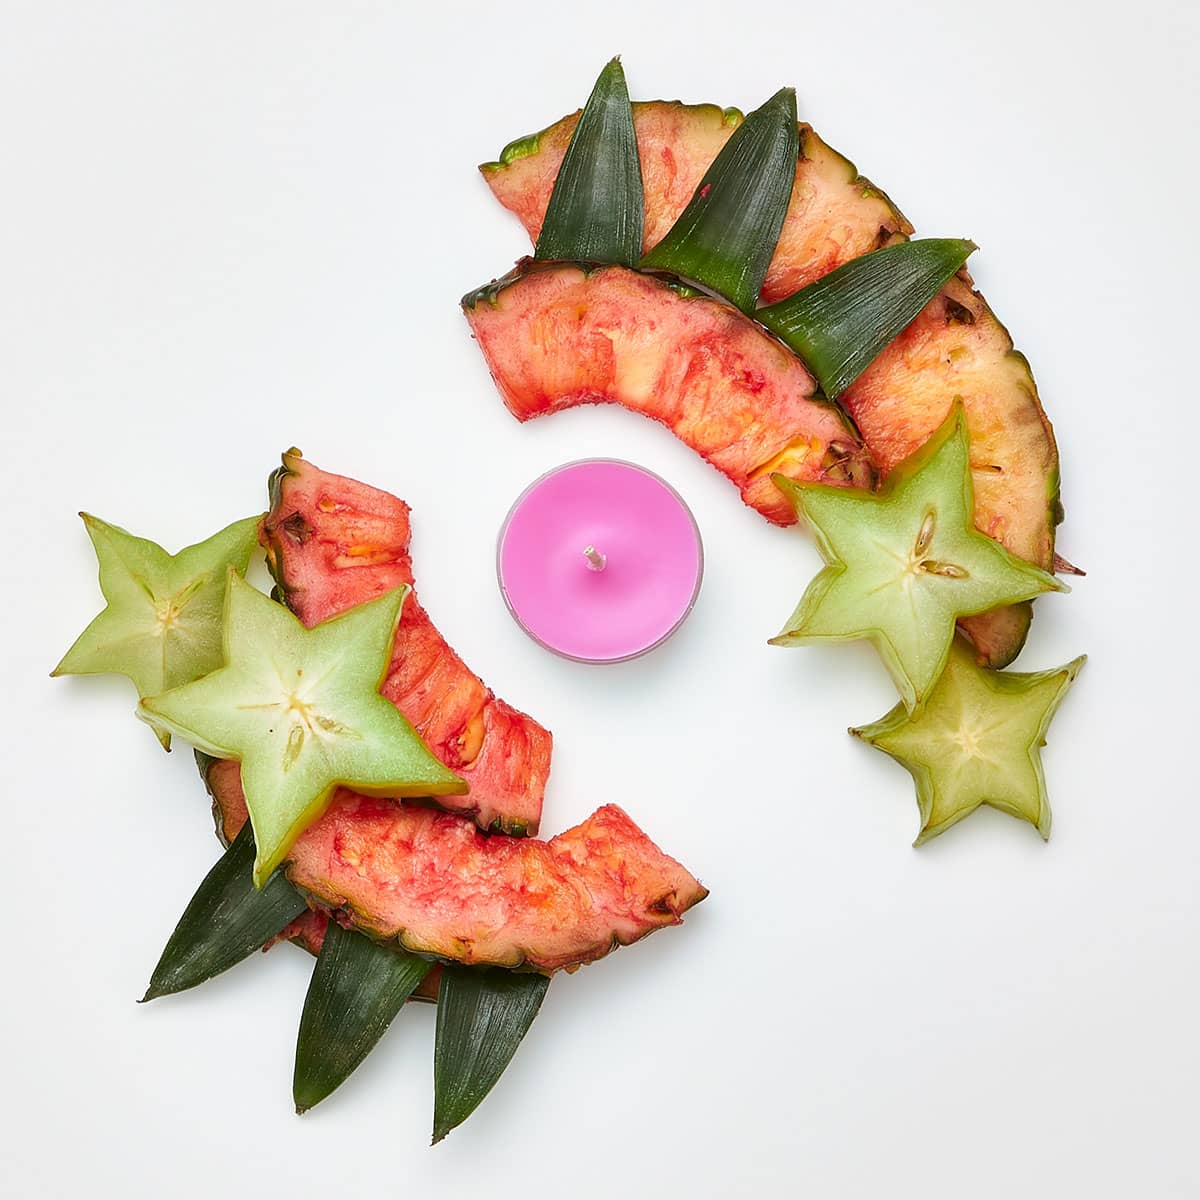 Pink Pineapple Colada Universal Tealight Candles